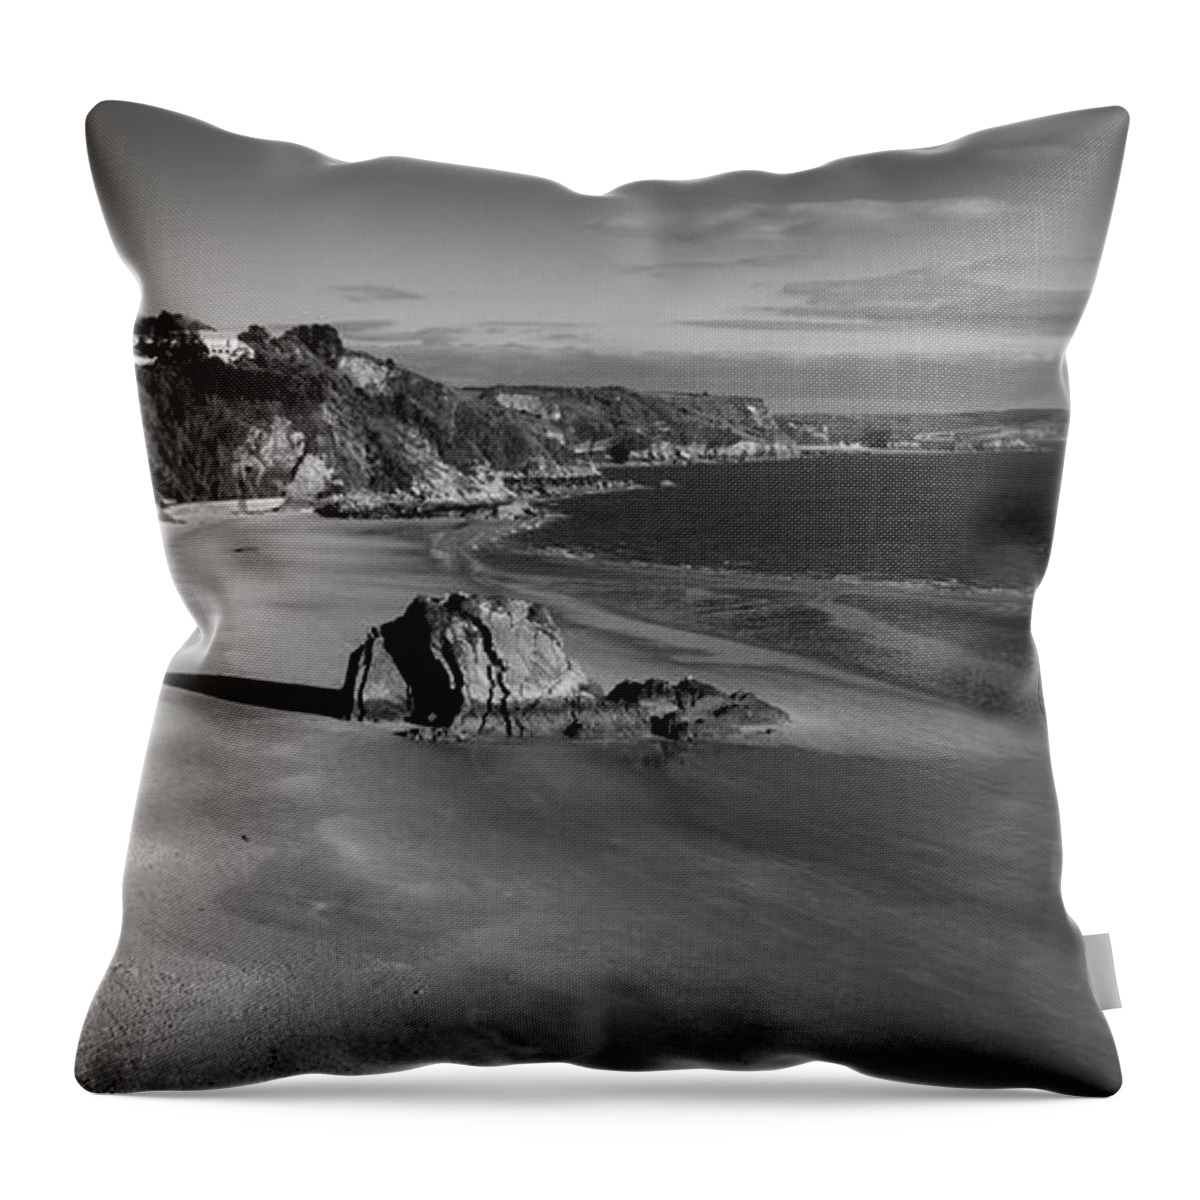 Britain Throw Pillow featuring the photograph North Beach, Tenby by Seeables Visual Arts